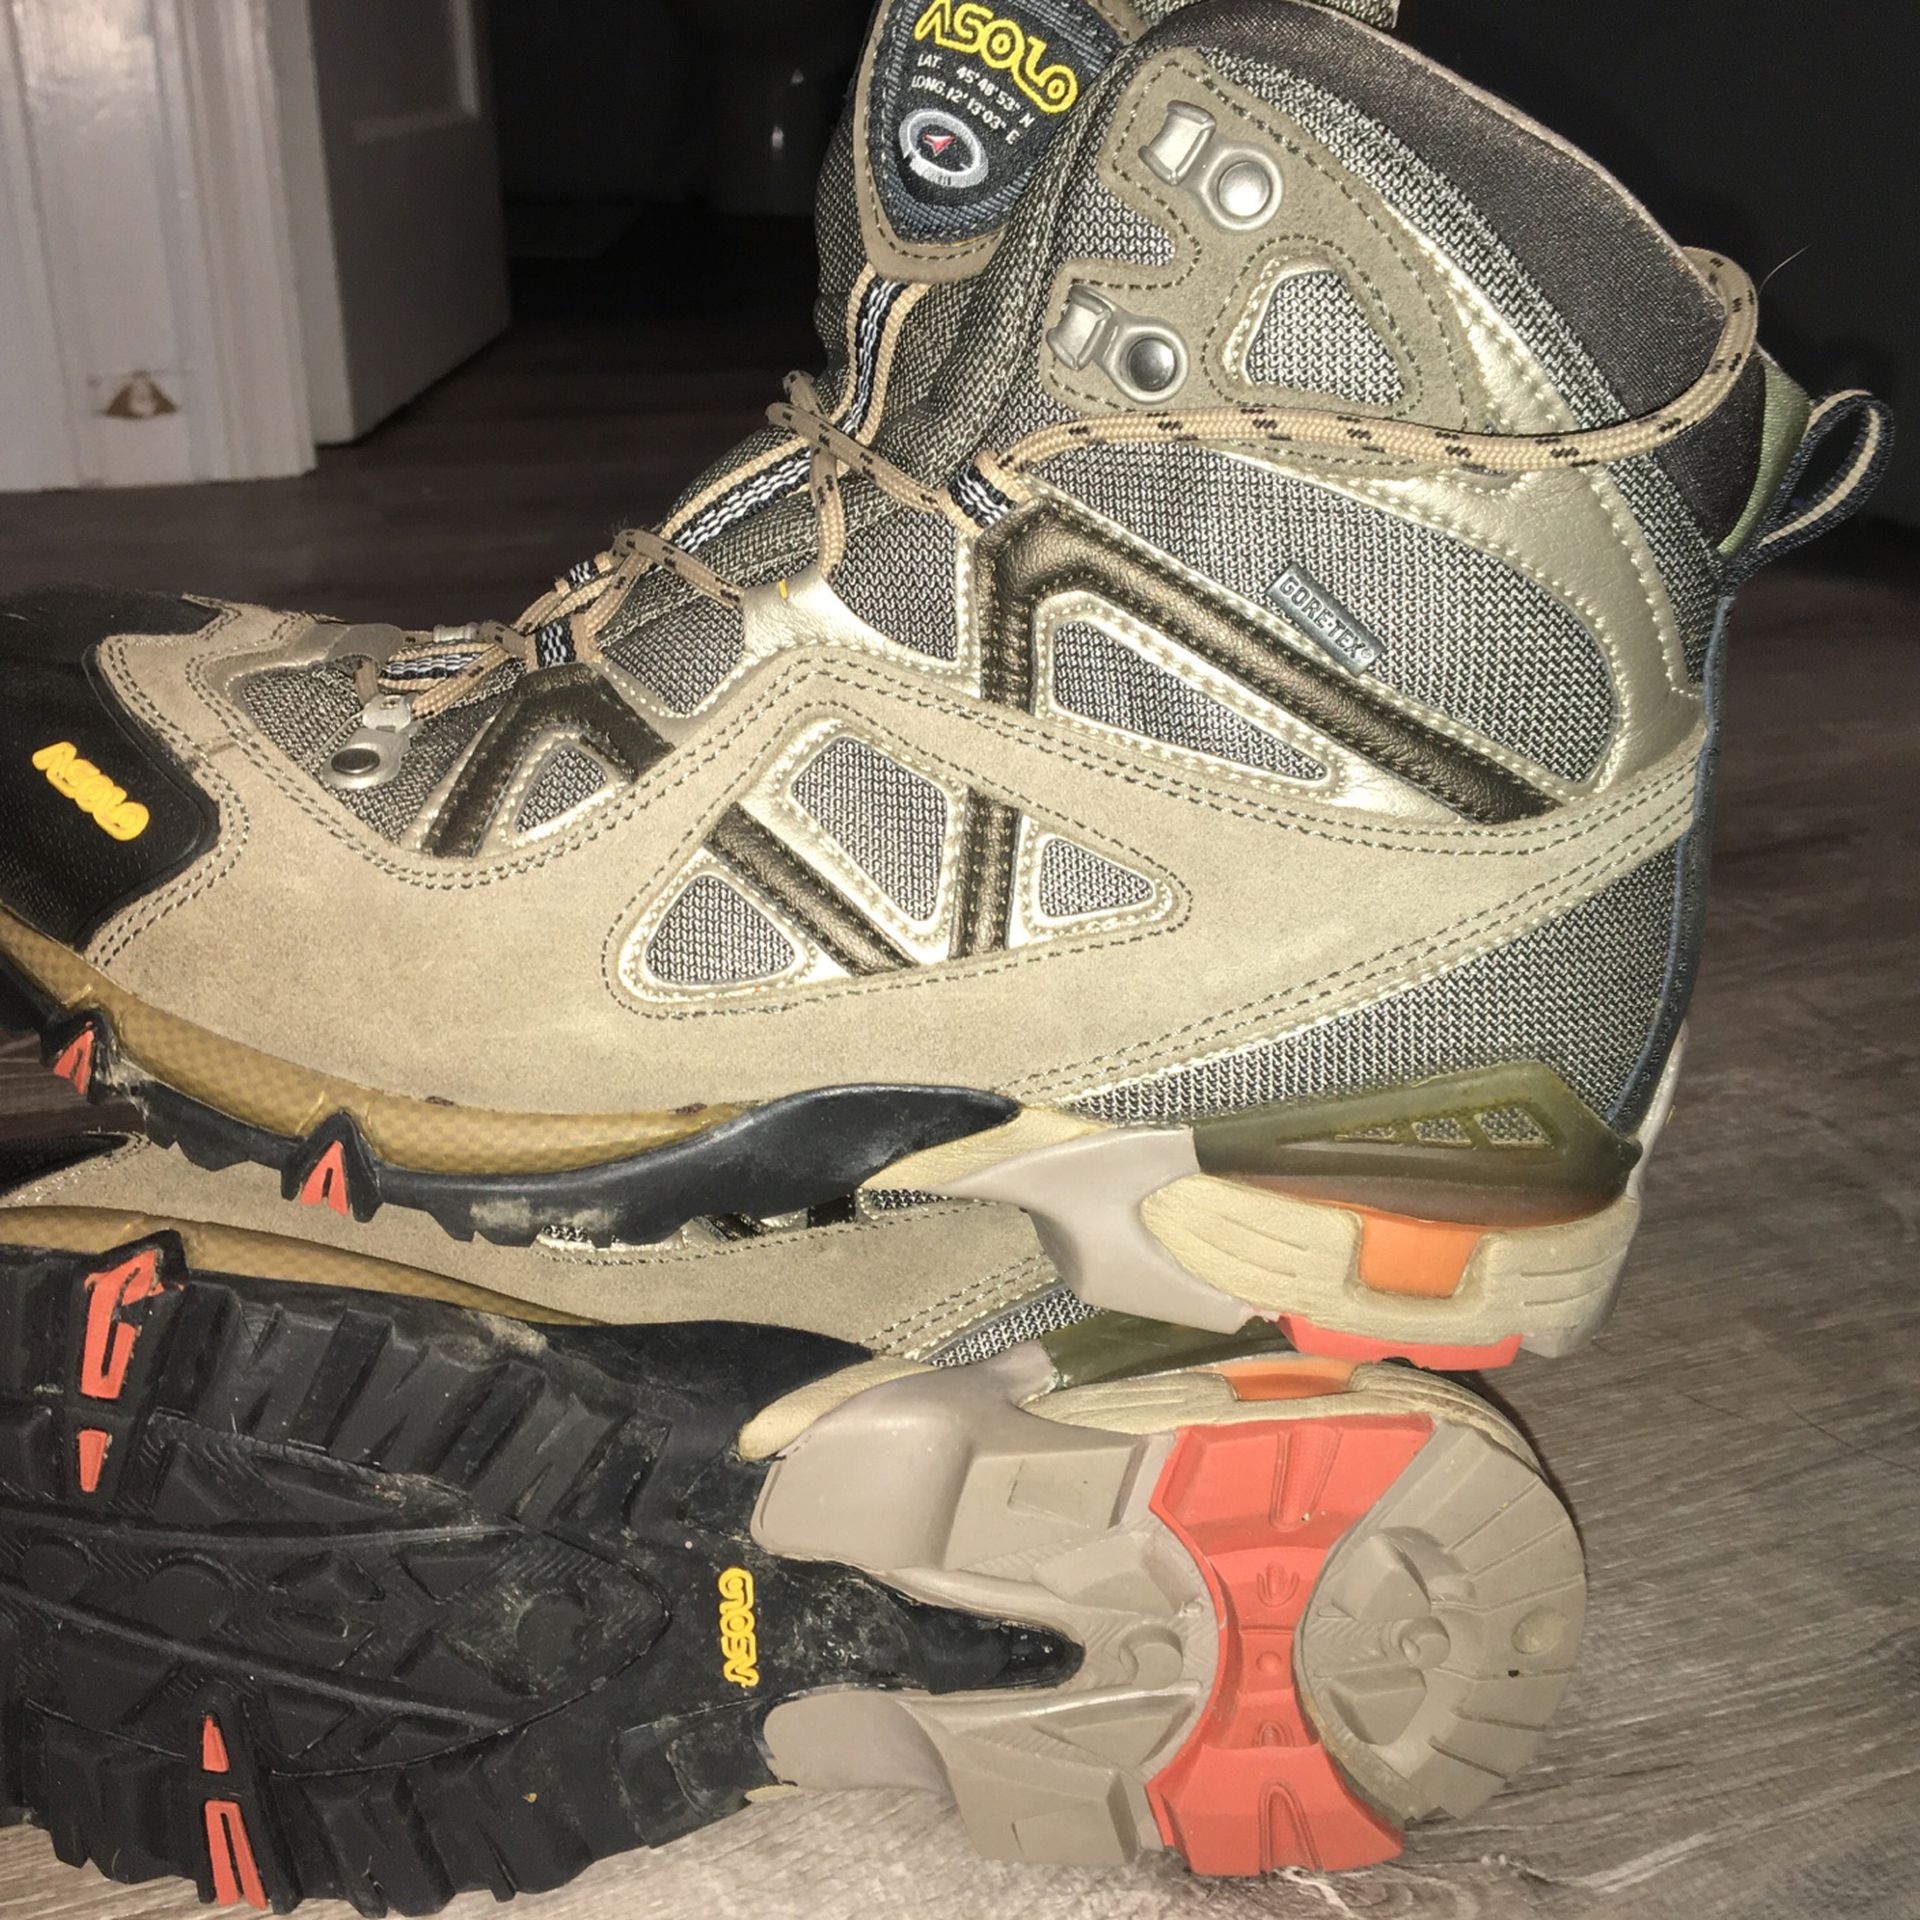 Asolo Hiking Boots